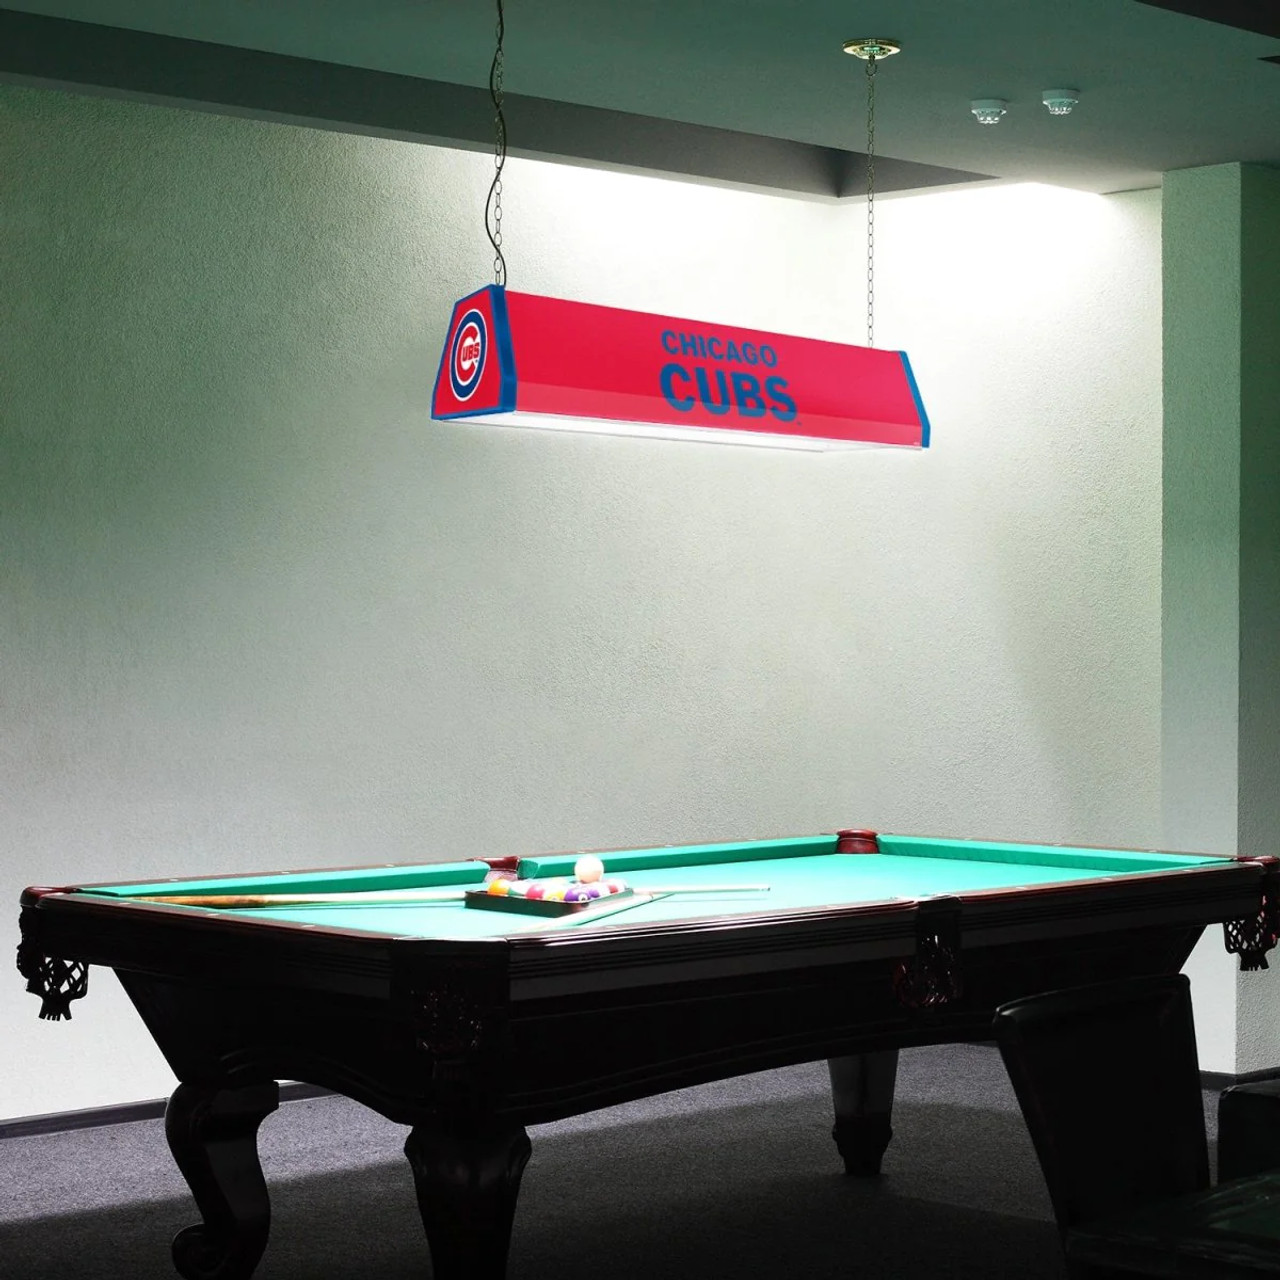 MBCUBS-310-01A, Chicago Cubs, Chi, Cubbies,  Standard, Billiard, Pool, Table, Light, Lamp, "A" Version, MLB, The Fan-Brand, 704384965688